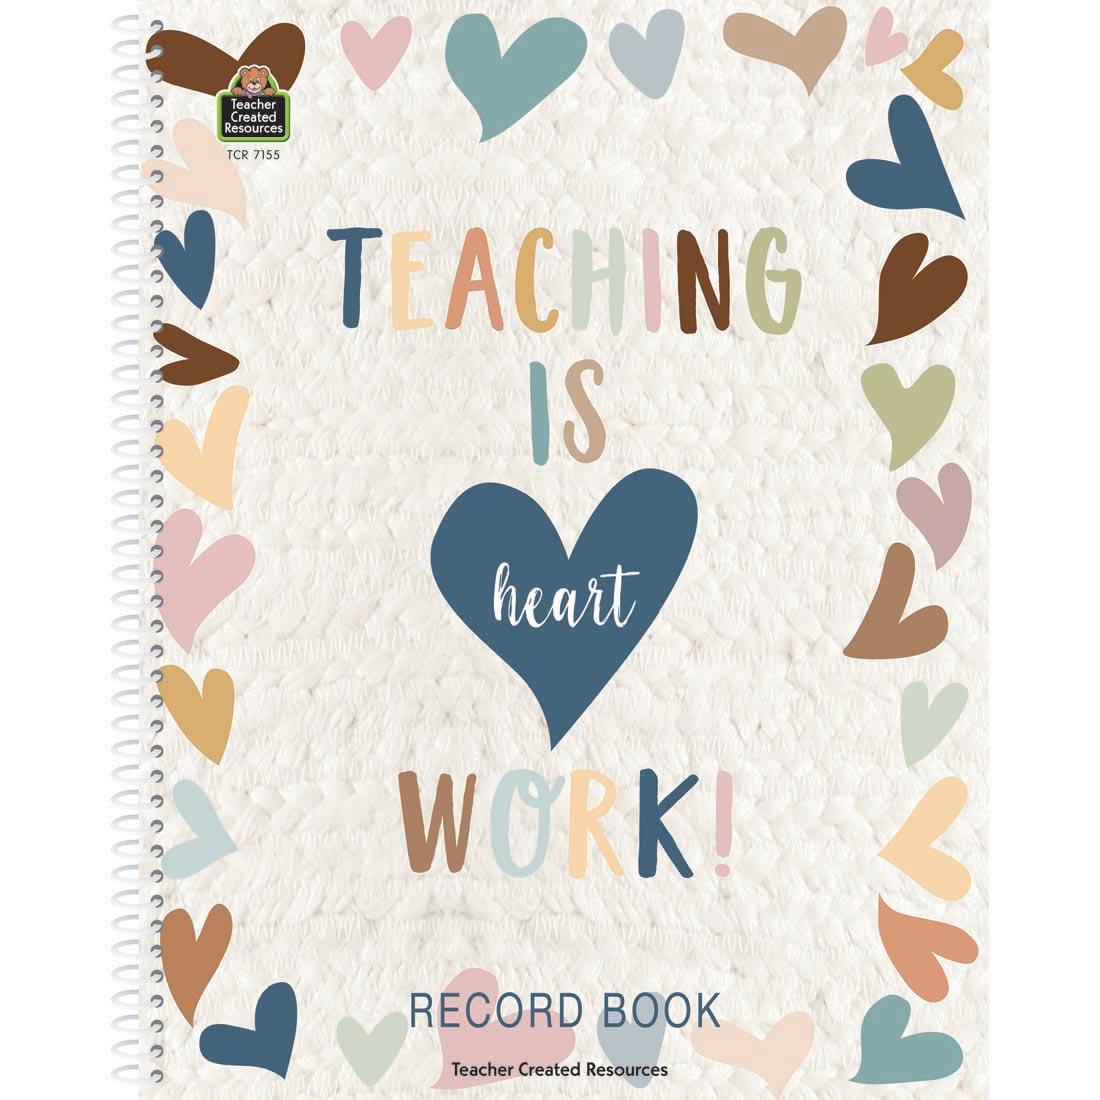 Record Book from the Everyone is Welcome collection by Teacher Created Resources reads Teaching is My Heart Work!